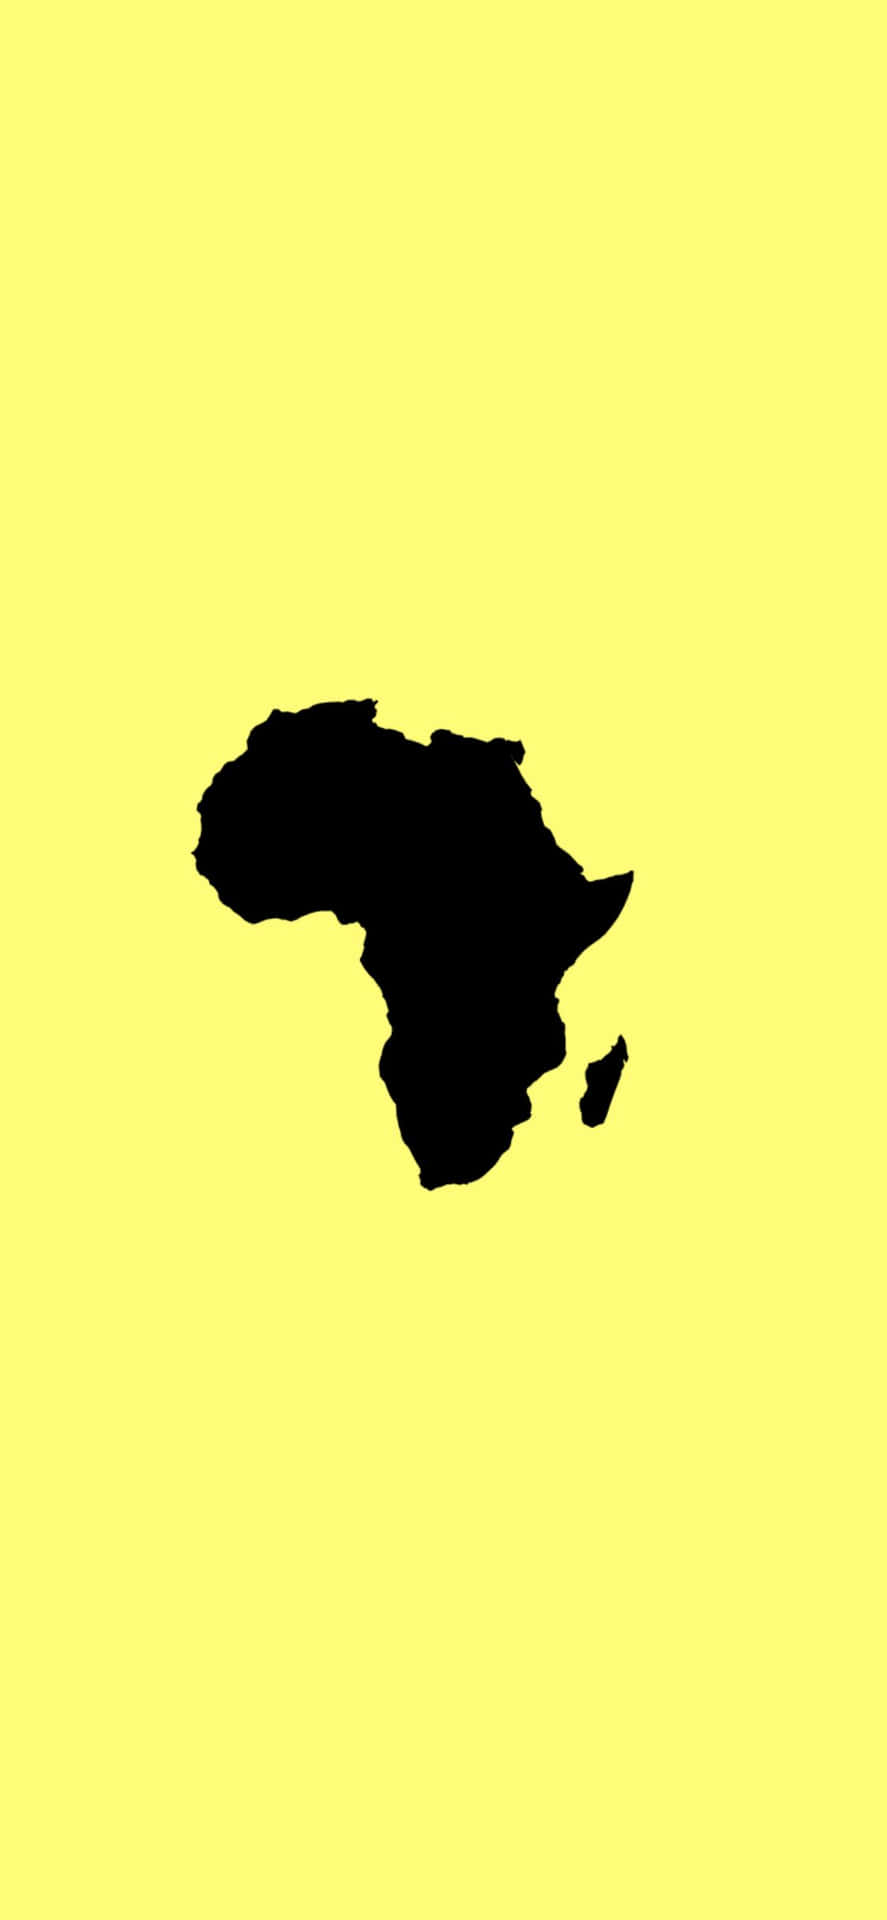 africa map silhouette on yellow background